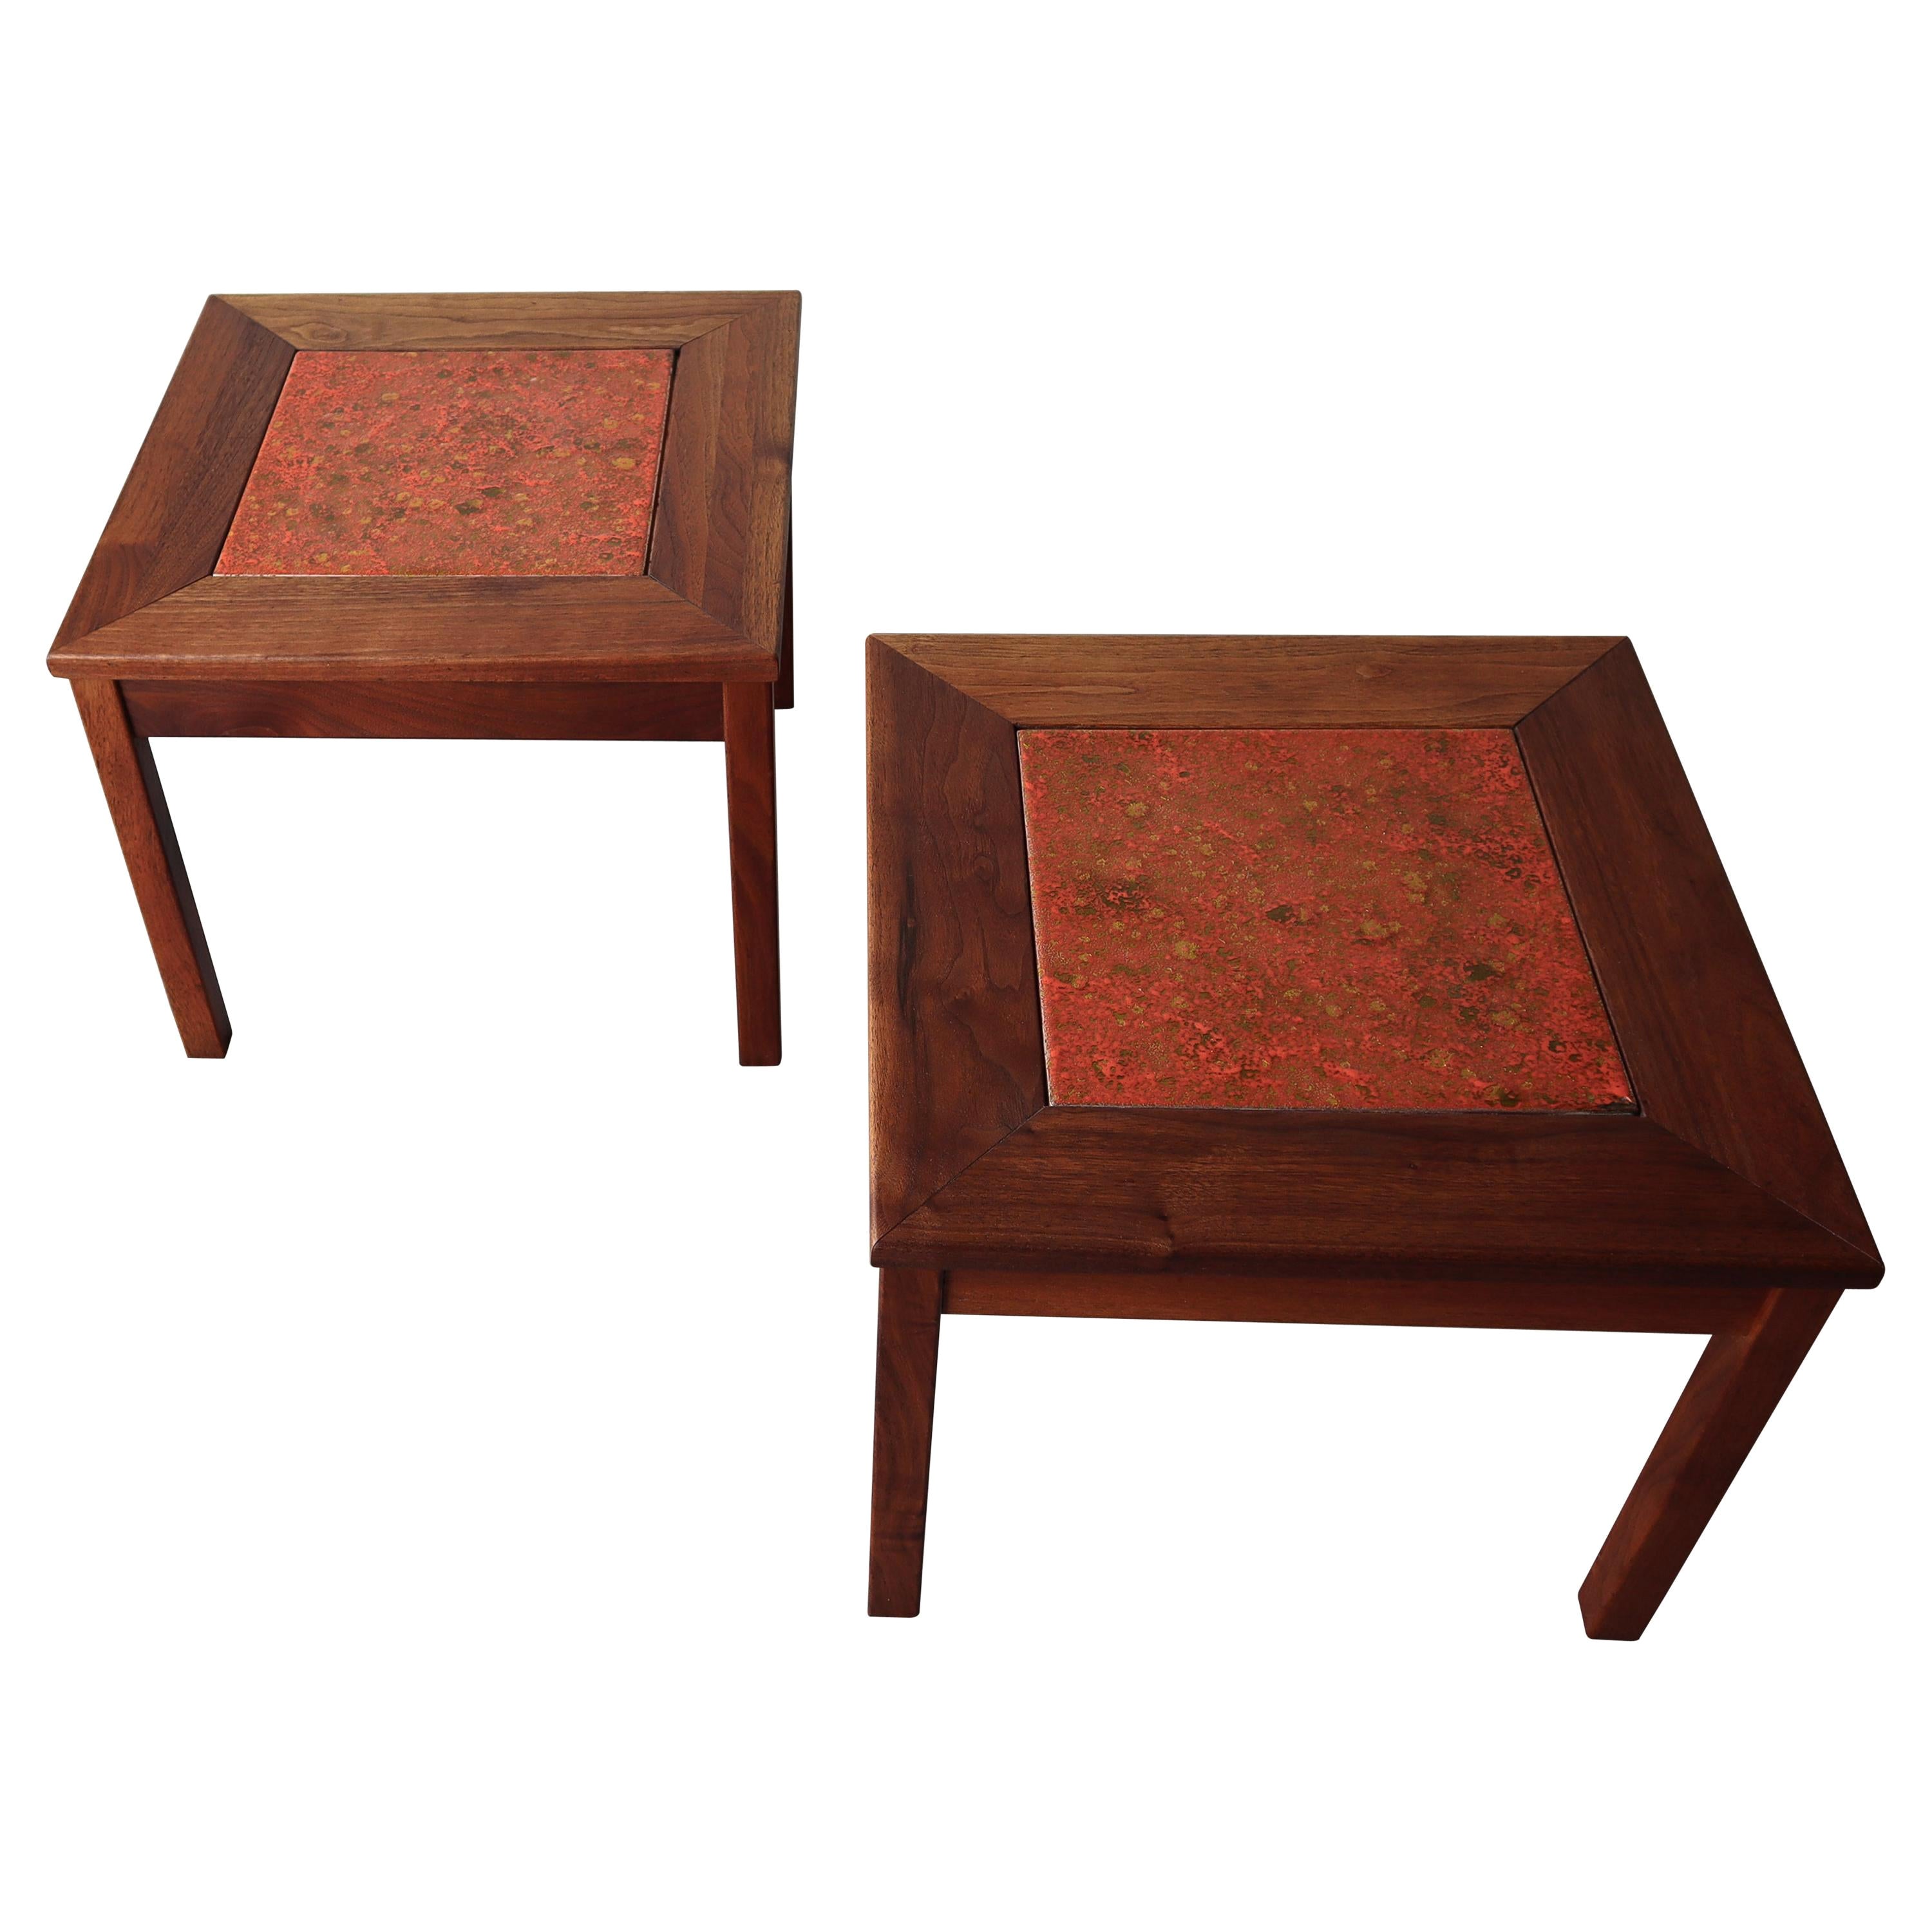 Pair of Midcentury Enameled Copper and Walnut Side Tables